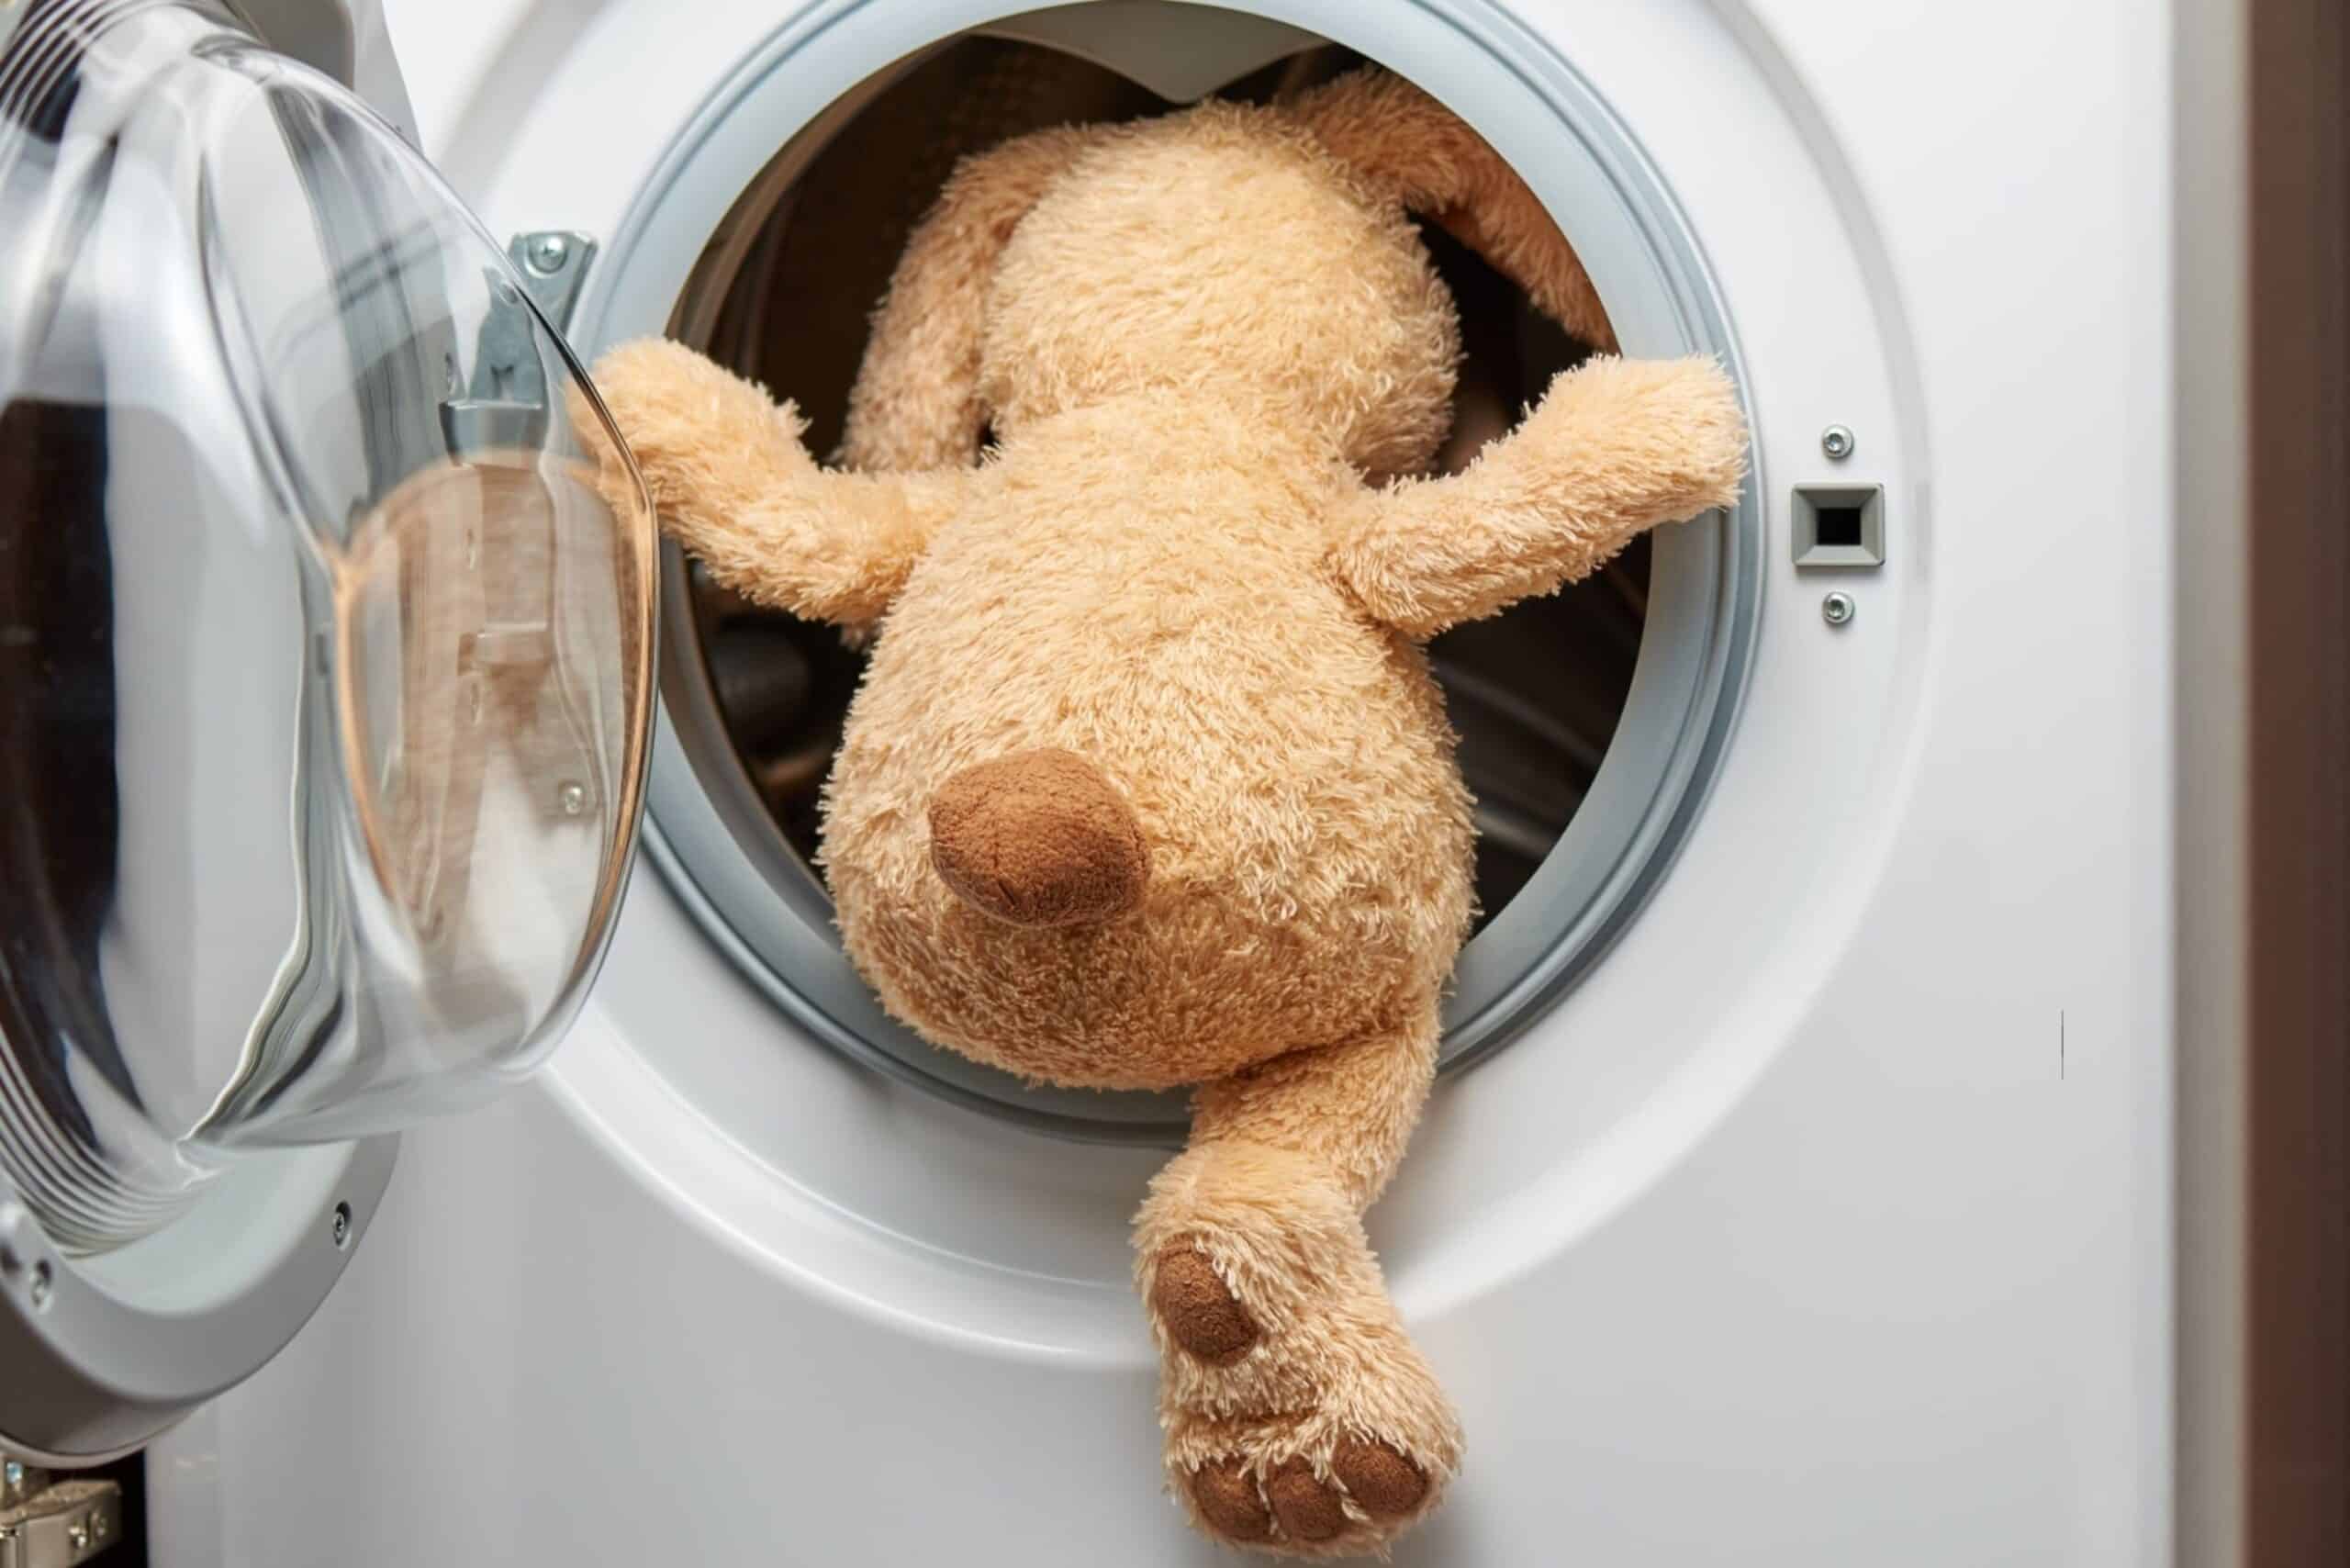 How to Wash Stuffed Animals Tidyhere Image of a Stuffed Toy Rabbit with His Back in the Washing Machine